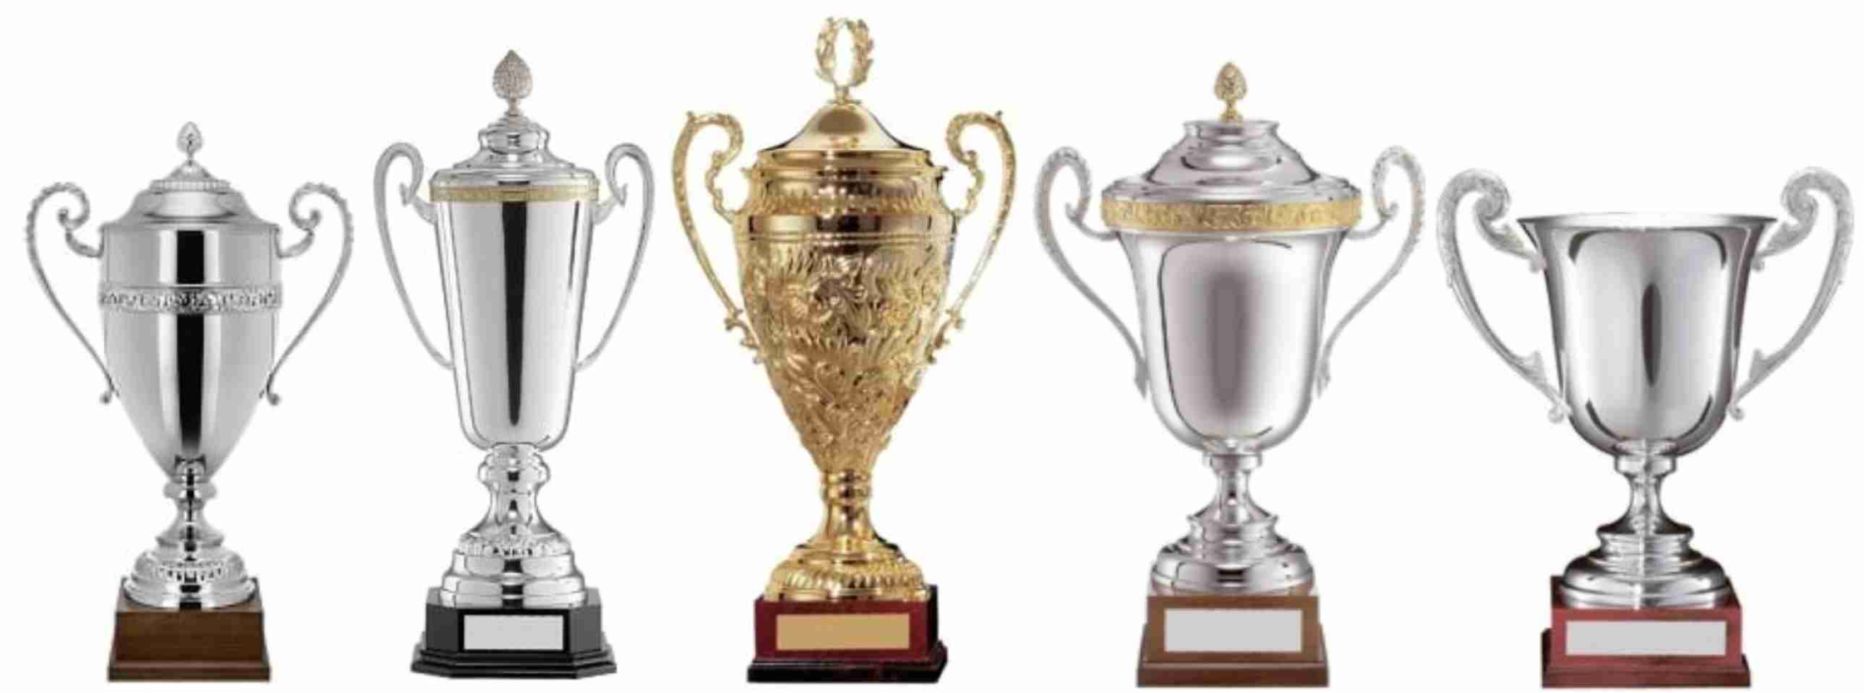 'Turin' Silver Cup Trophy Value Bargain Award *Free Personalised Label* 4 SIZES 